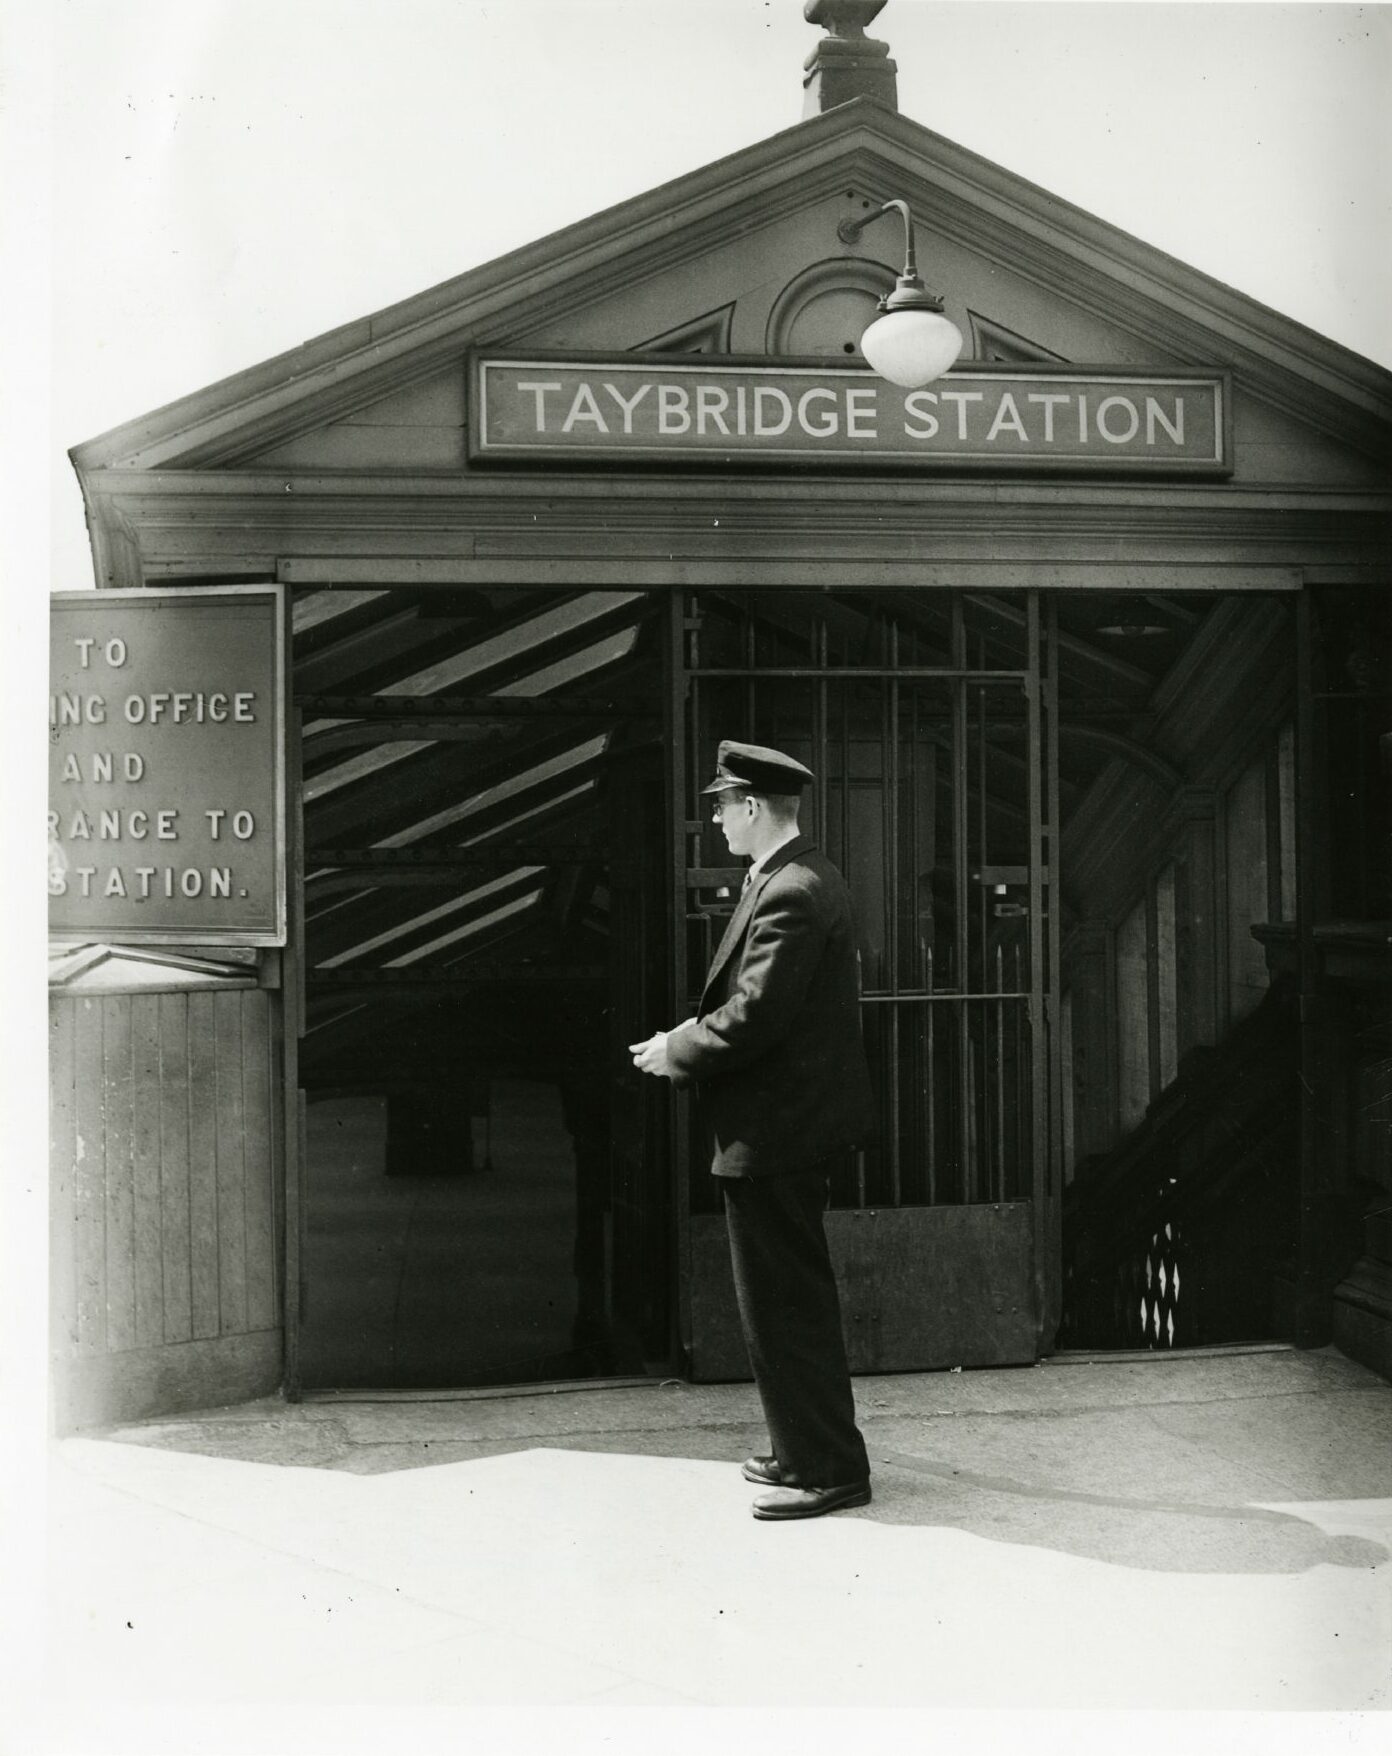 A train conductor standing by the entrance of Tay Bridge Station in Dundee.